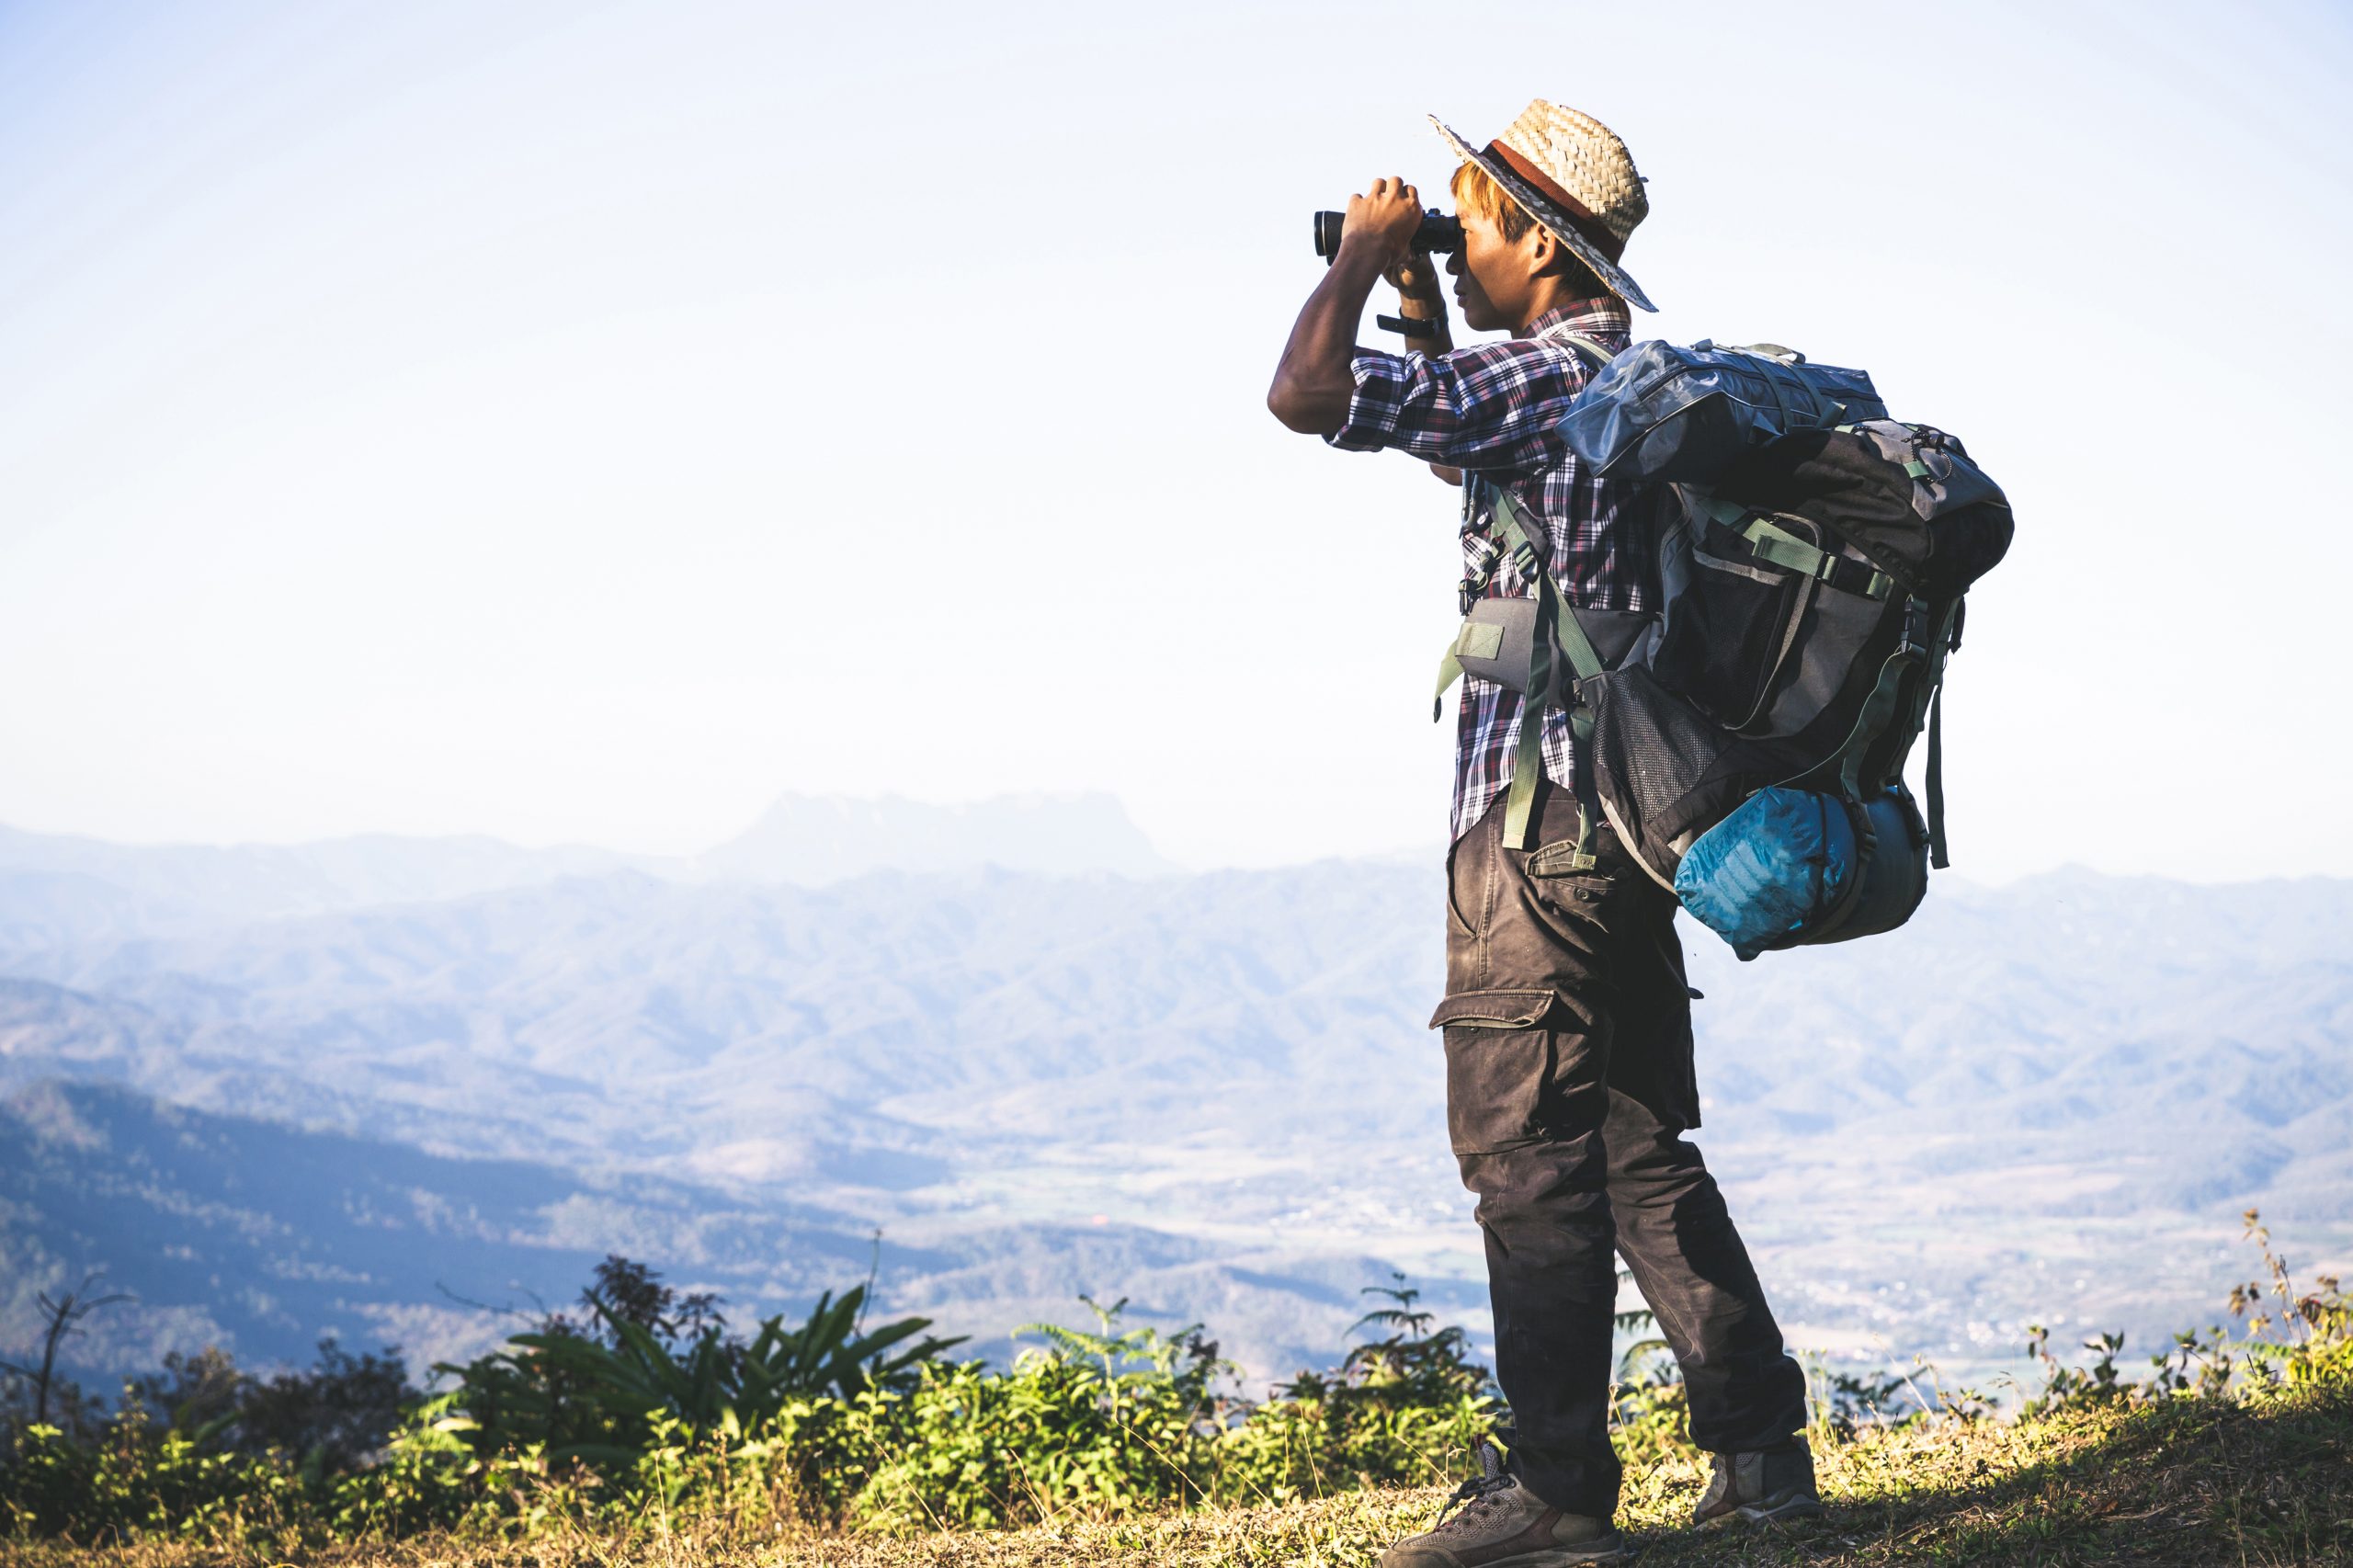 A man is standing on a mountain top, looking through binoculars. He is wearing a large backpack and a hat.